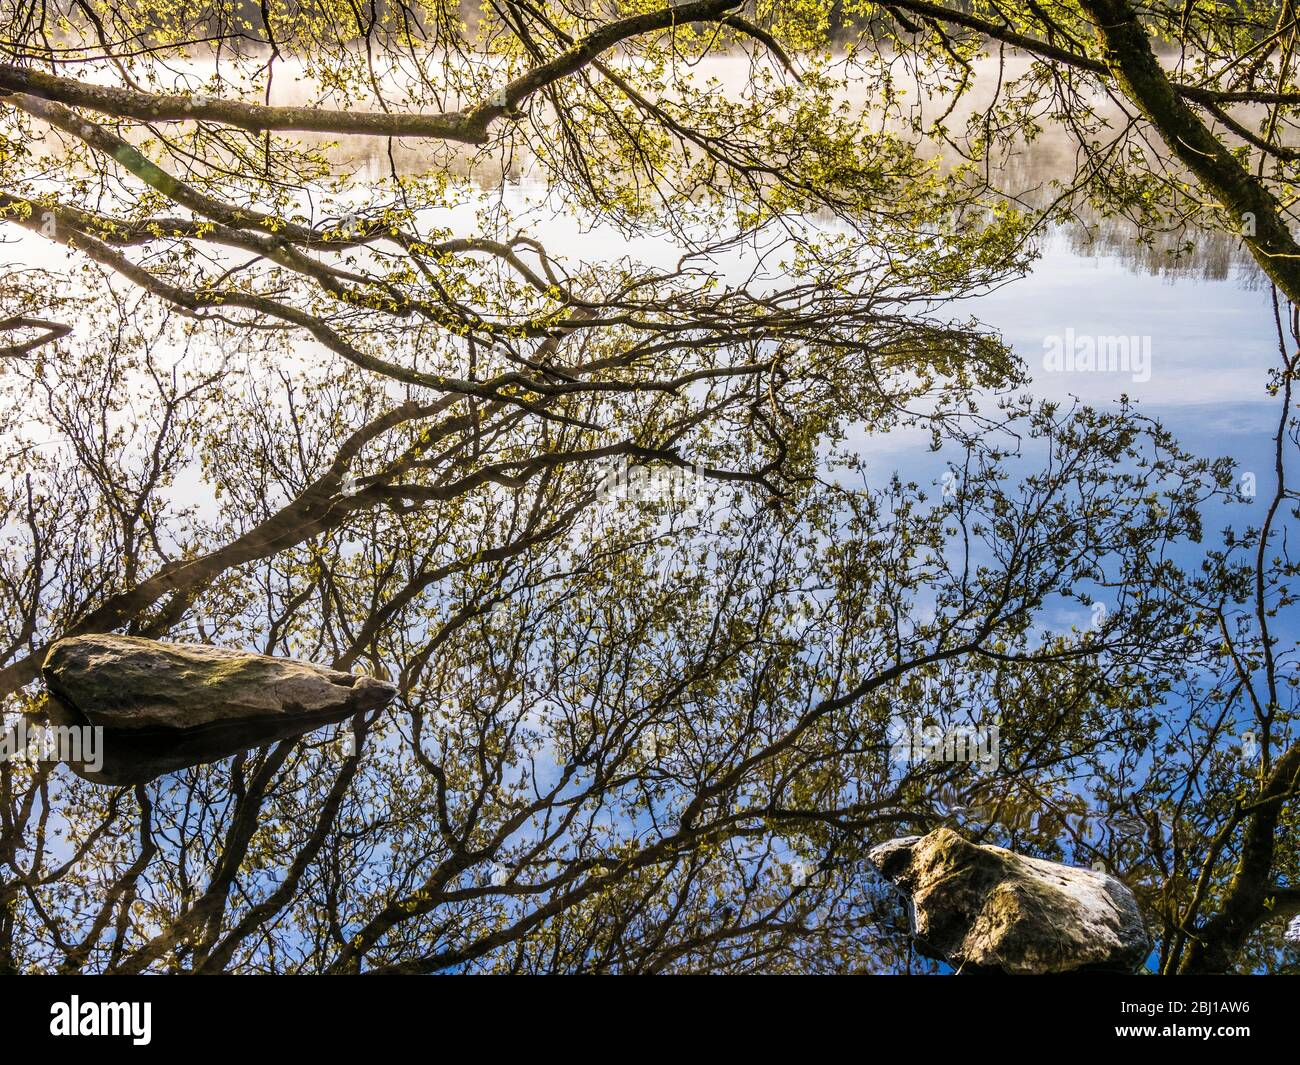 The branch of a tree and its reflection in the still water of a lake. Stock Photo